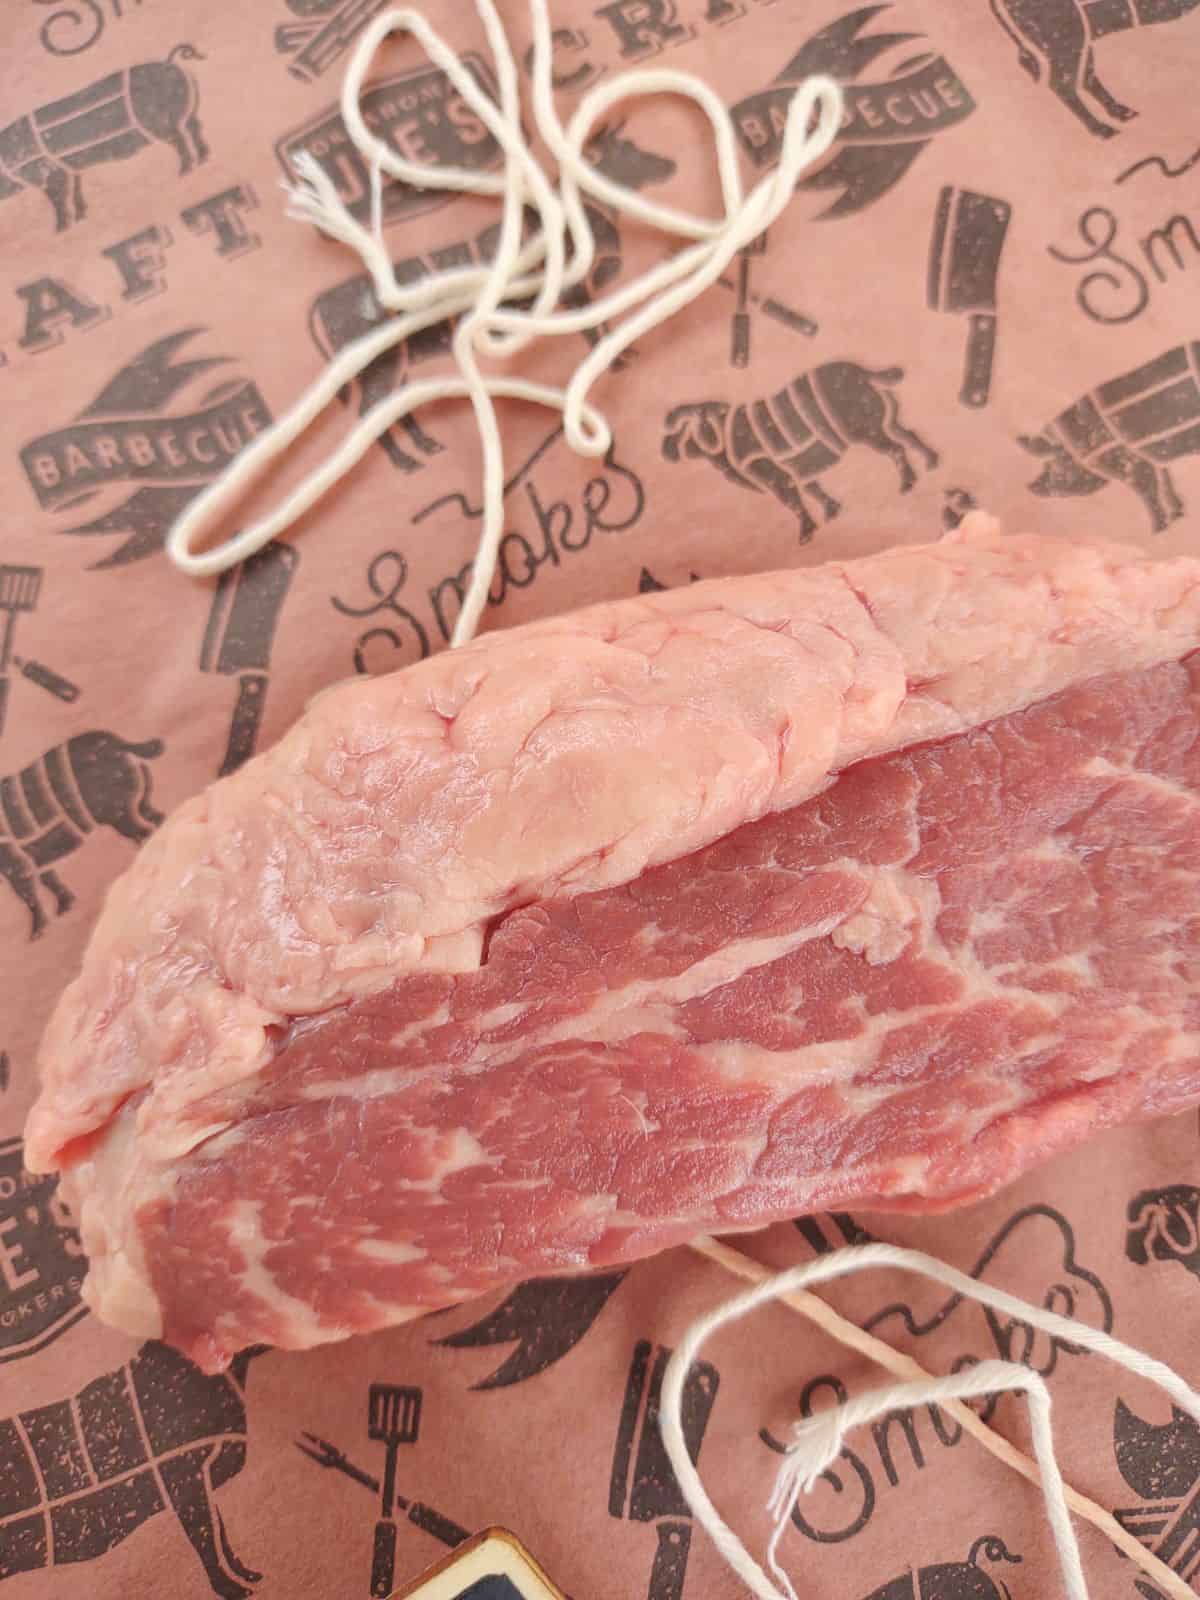 A raw Newport steak on a piece of butcher paper with string underneath the steak. The picture is zoomed in on the fat cap on the top part of the steak.